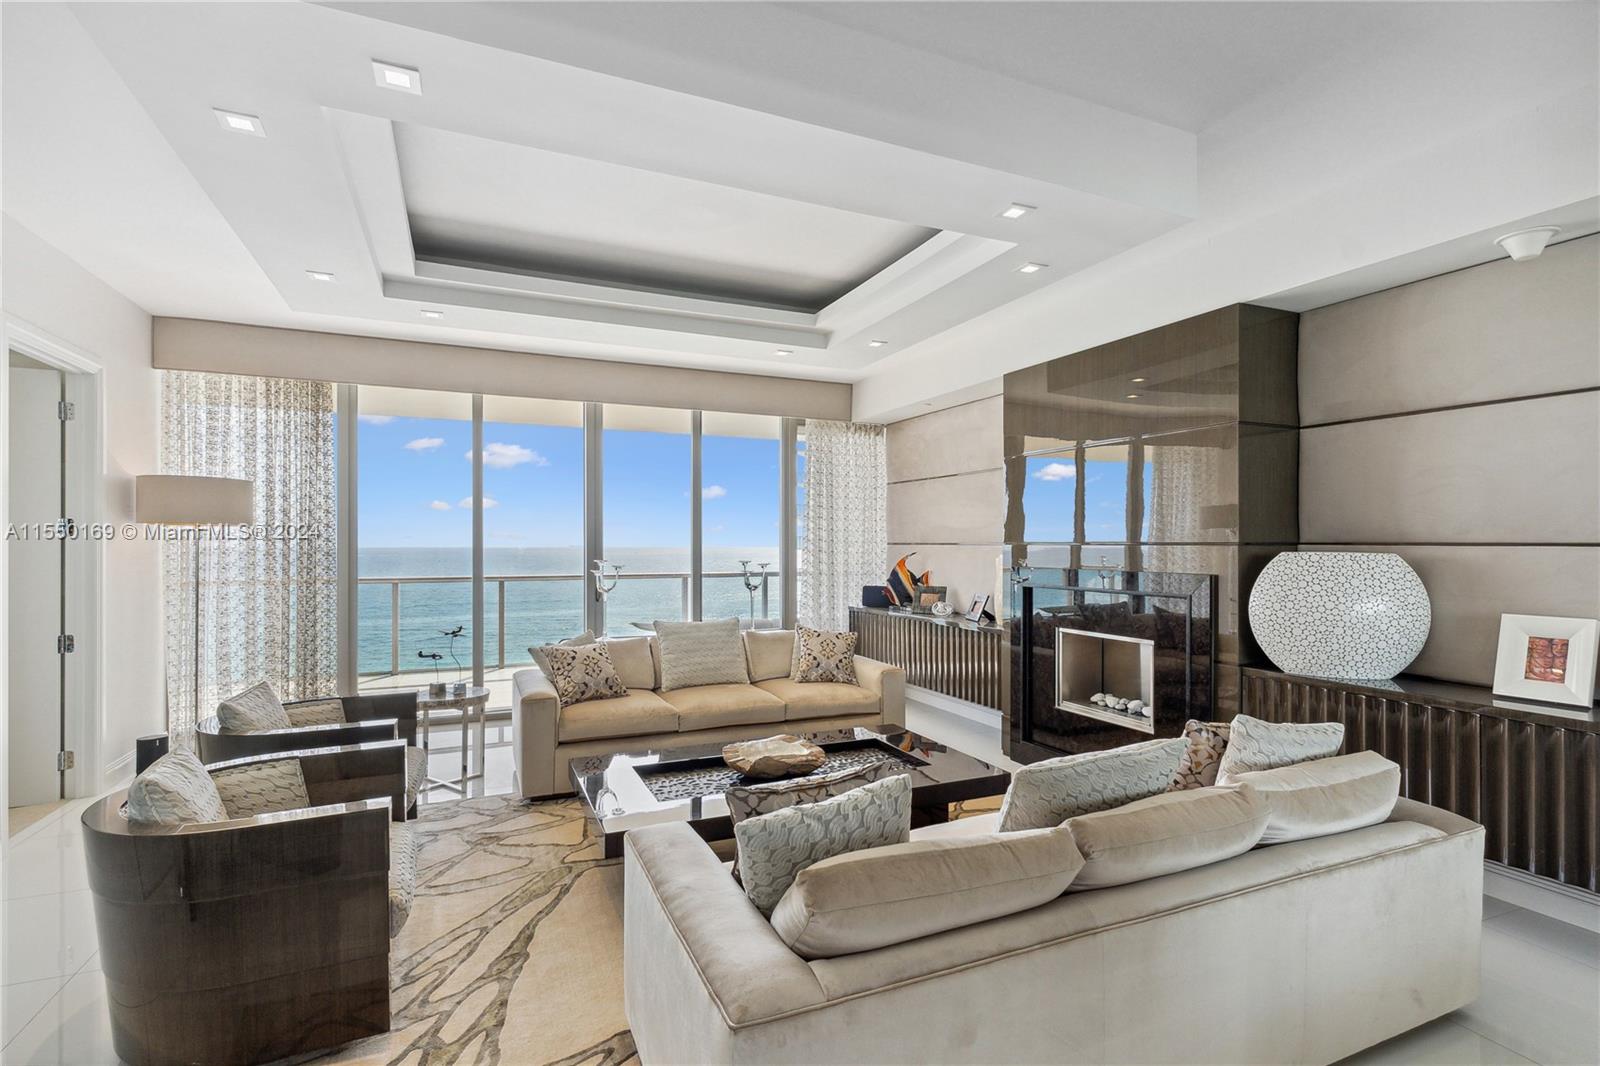 9705 Collins Ave 1102N, Bal Harbour, Miami-Dade County, Florida - 3 Bedrooms  
4 Bathrooms - 